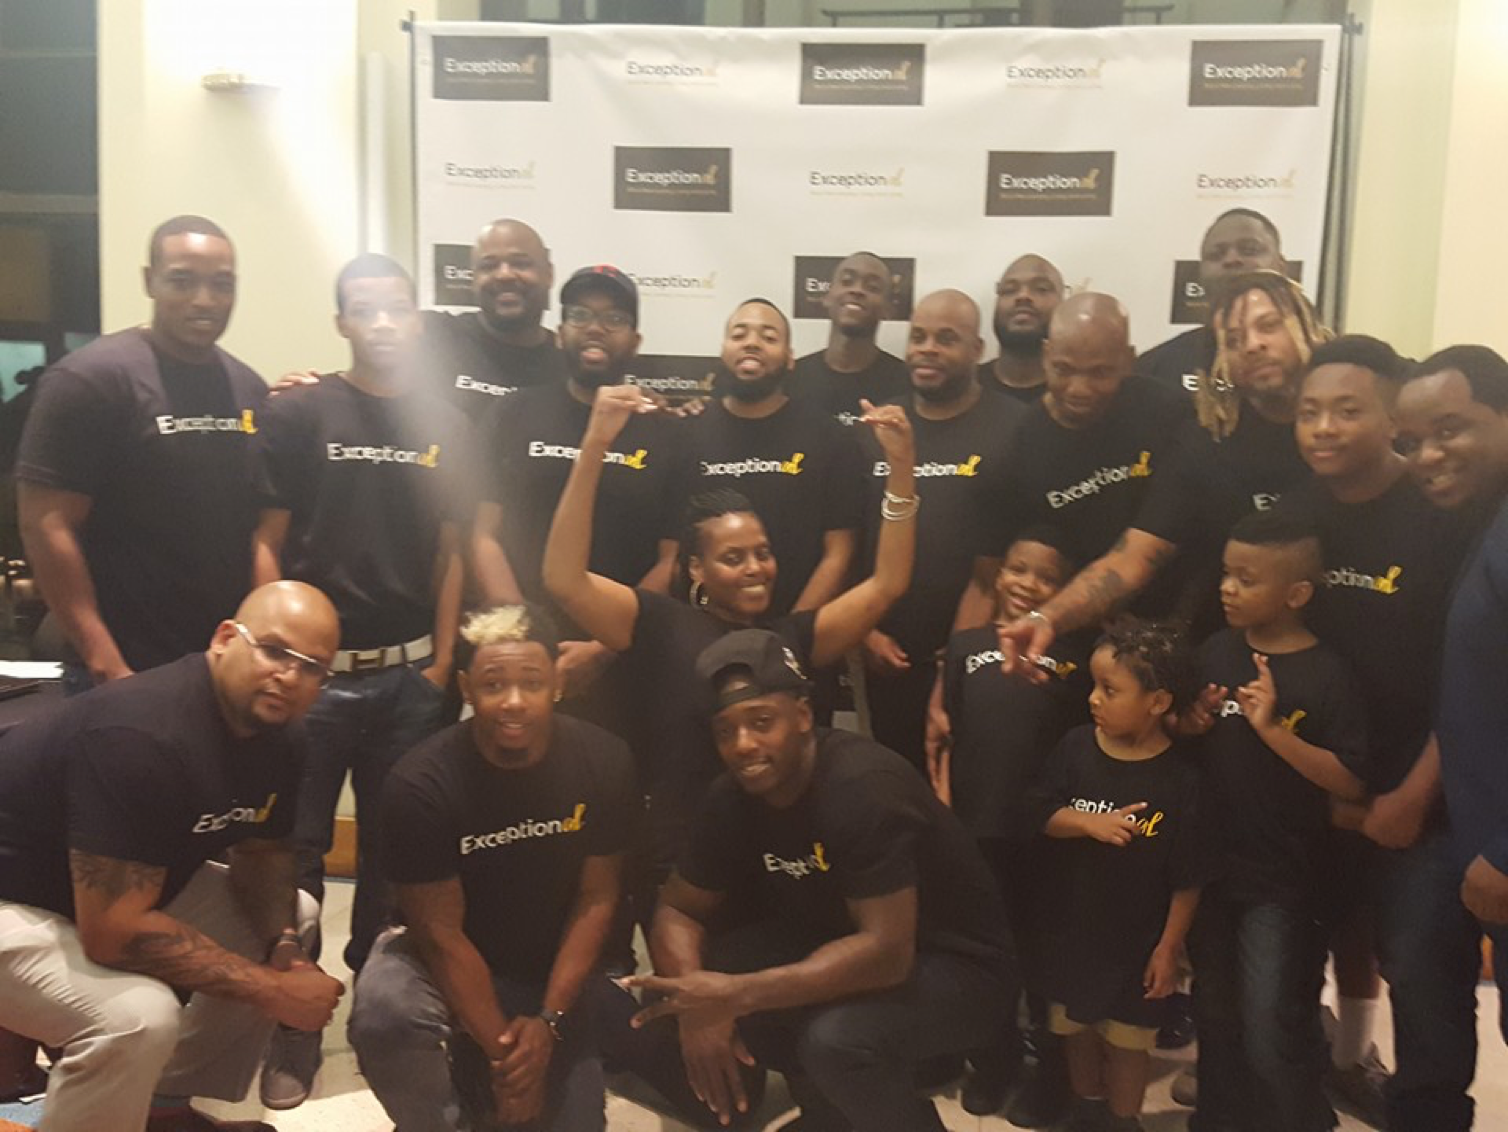 Men of The ExceptionAL Project at the Book Release and Signing  at the Schombug Center for Research in Black Culture